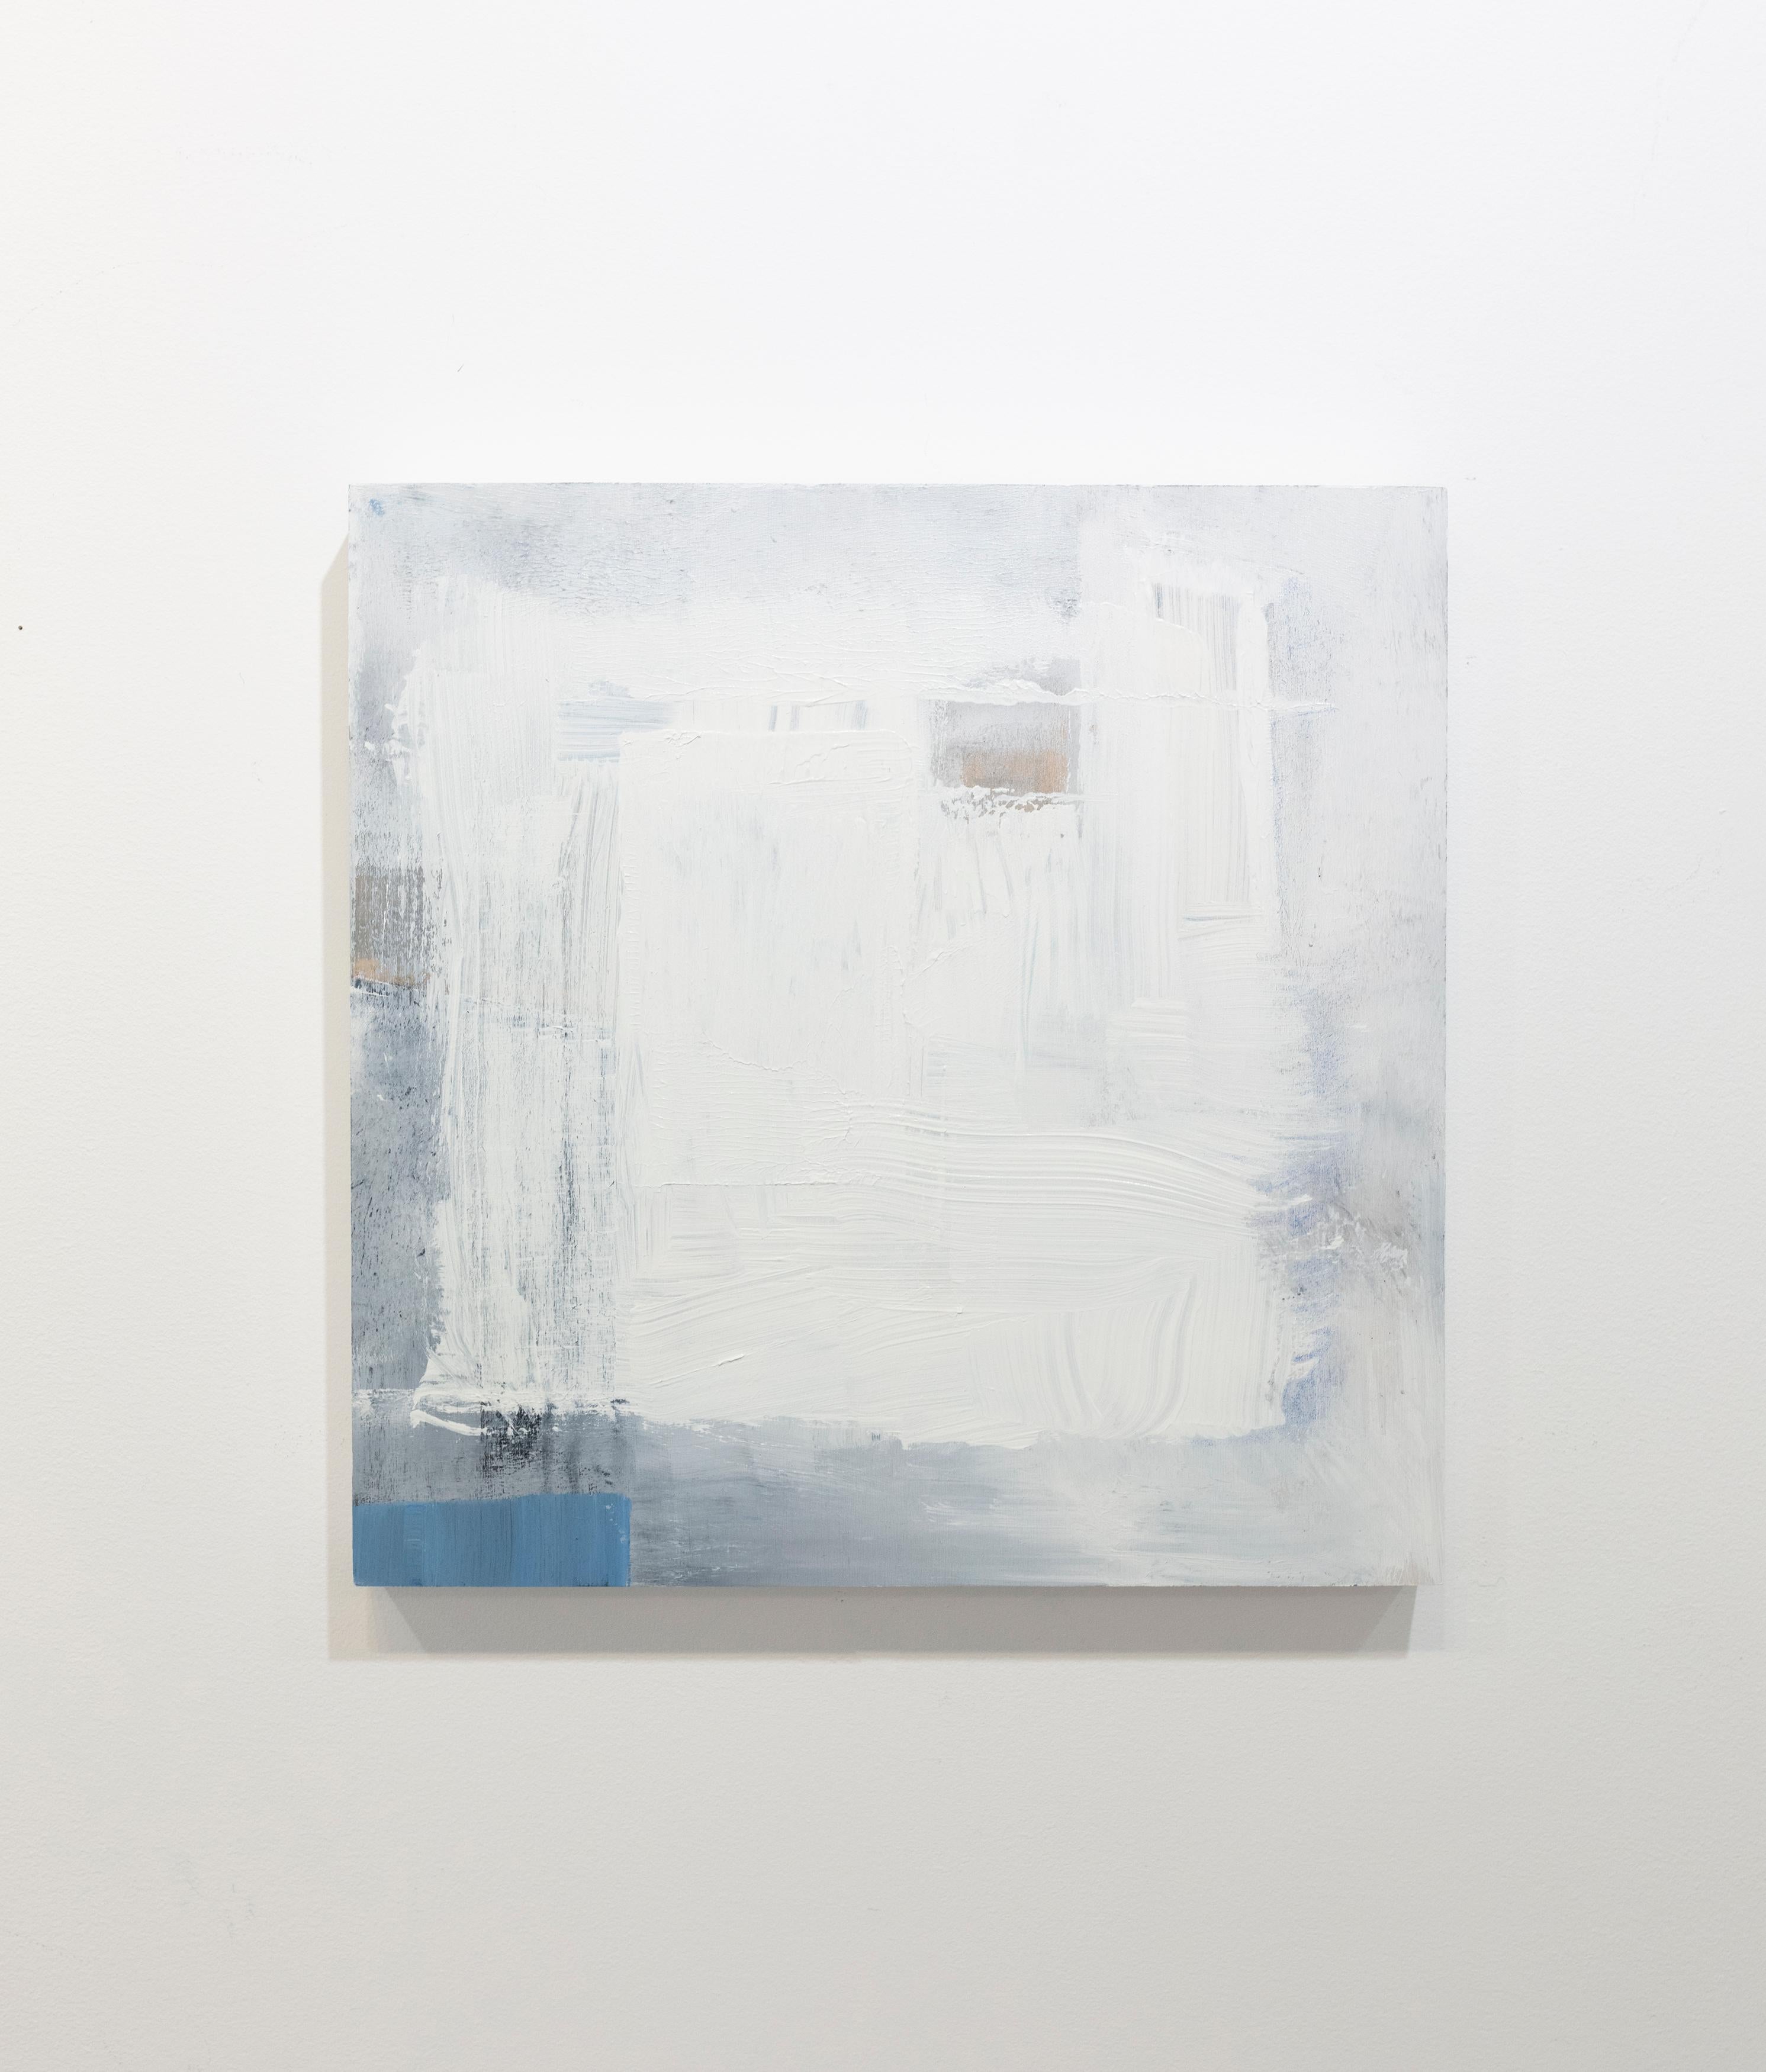 This abstract painting by Sue De Chiara is made with acrylic paint on panel. It features a light blue and white palette and a layered, minimalist composition. The painting has clean, white painted sides and is signed by the artist on the back of the